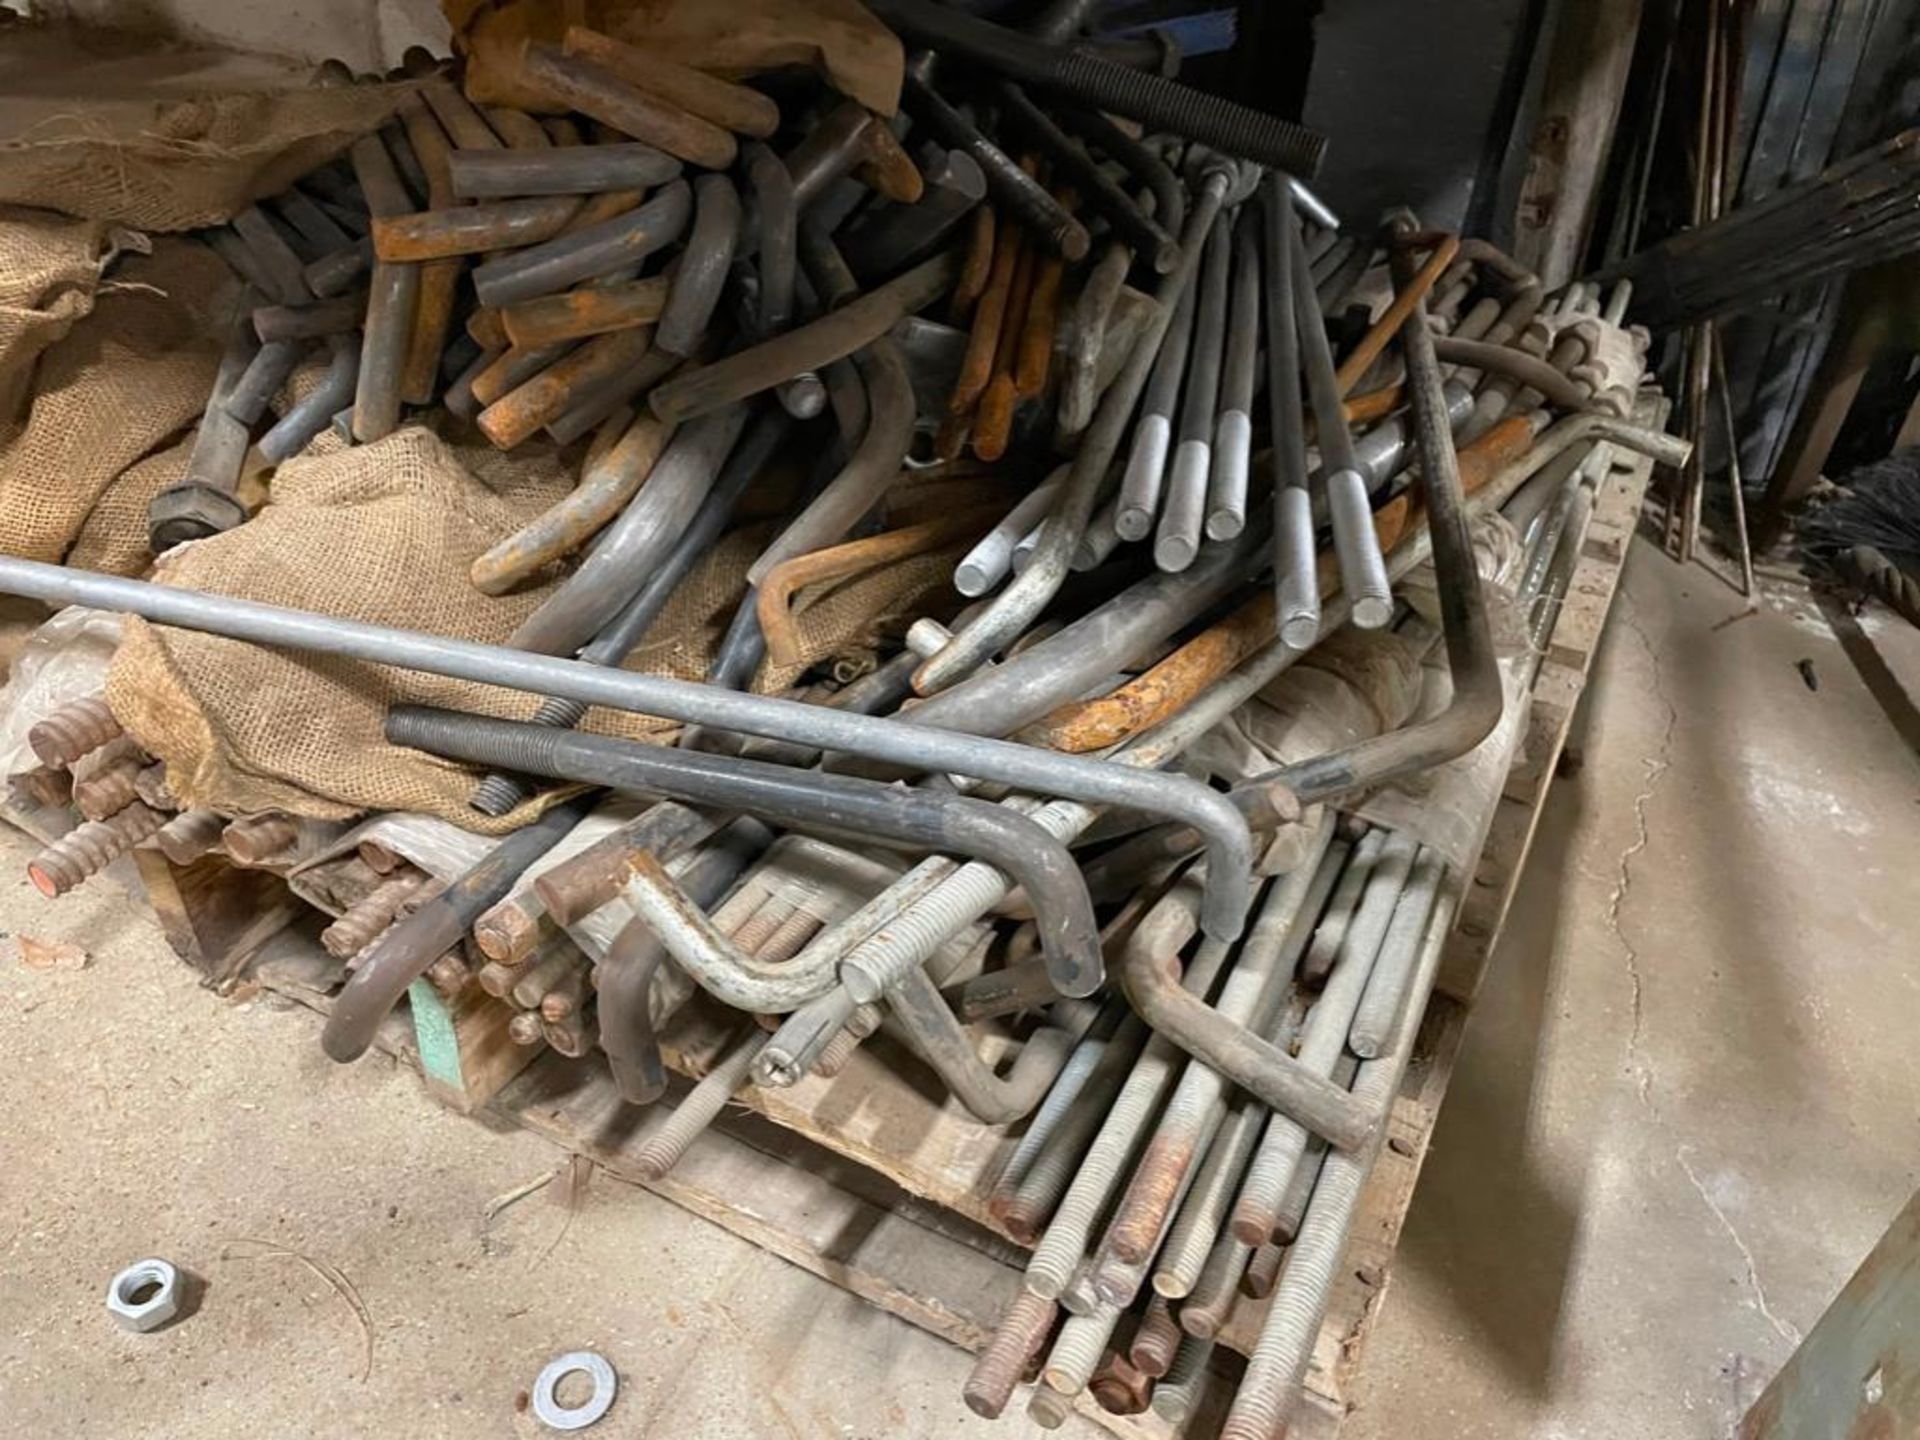 Contents of Shelf & Pallet, Various Size Anchor Bolts. Located in Hazelwood, MO - Image 5 of 10